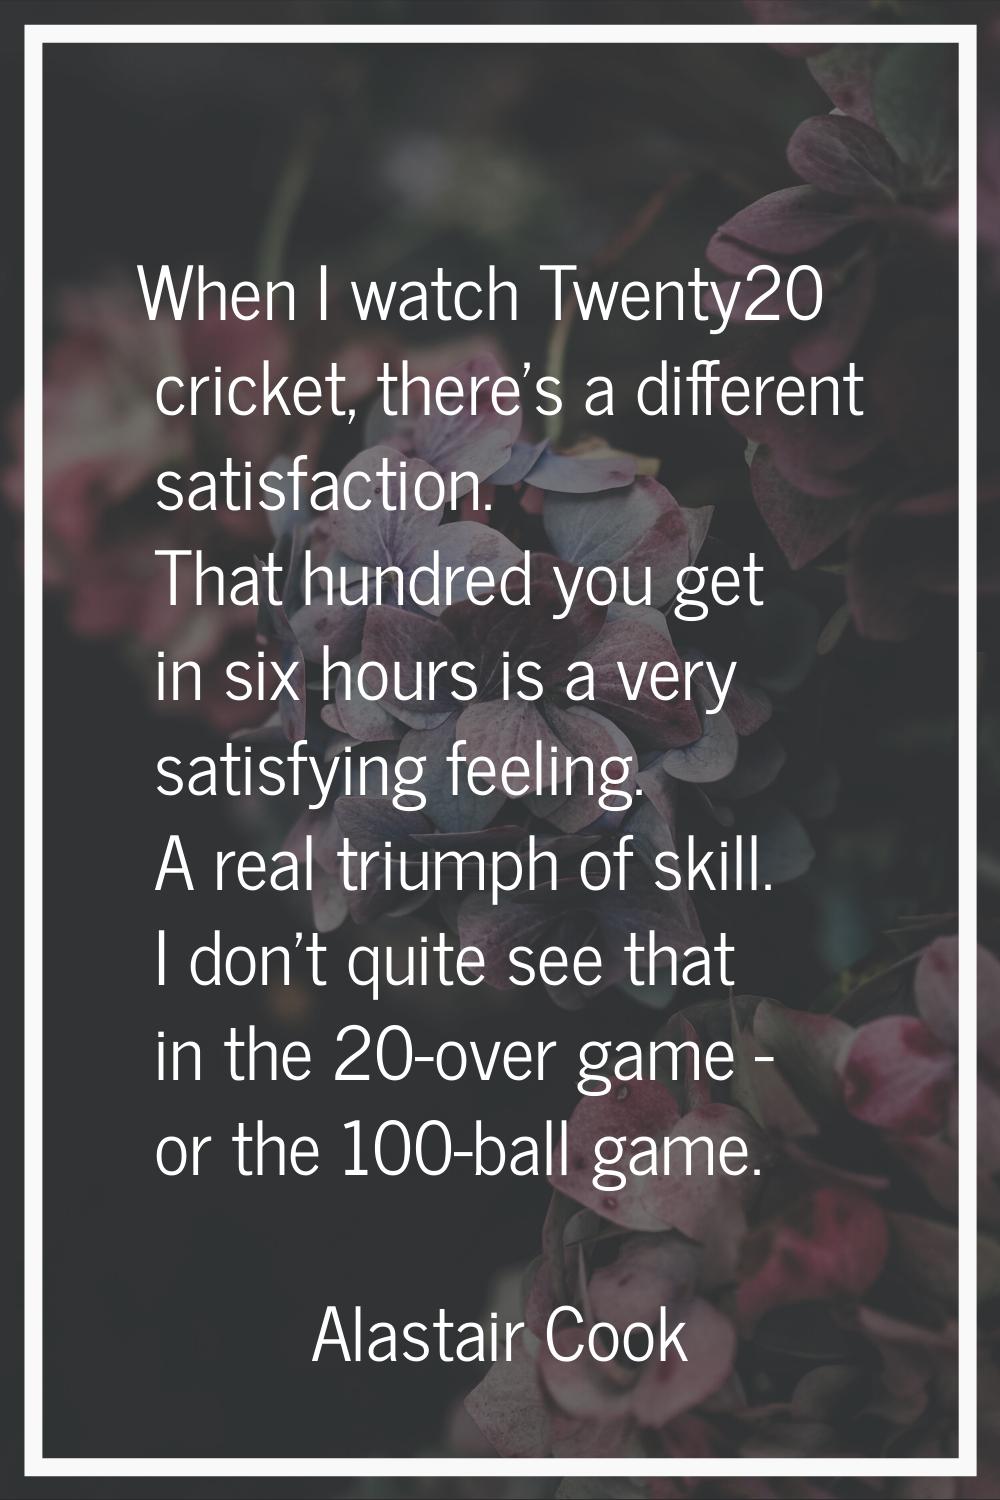 When I watch Twenty20 cricket, there's a different satisfaction. That hundred you get in six hours 